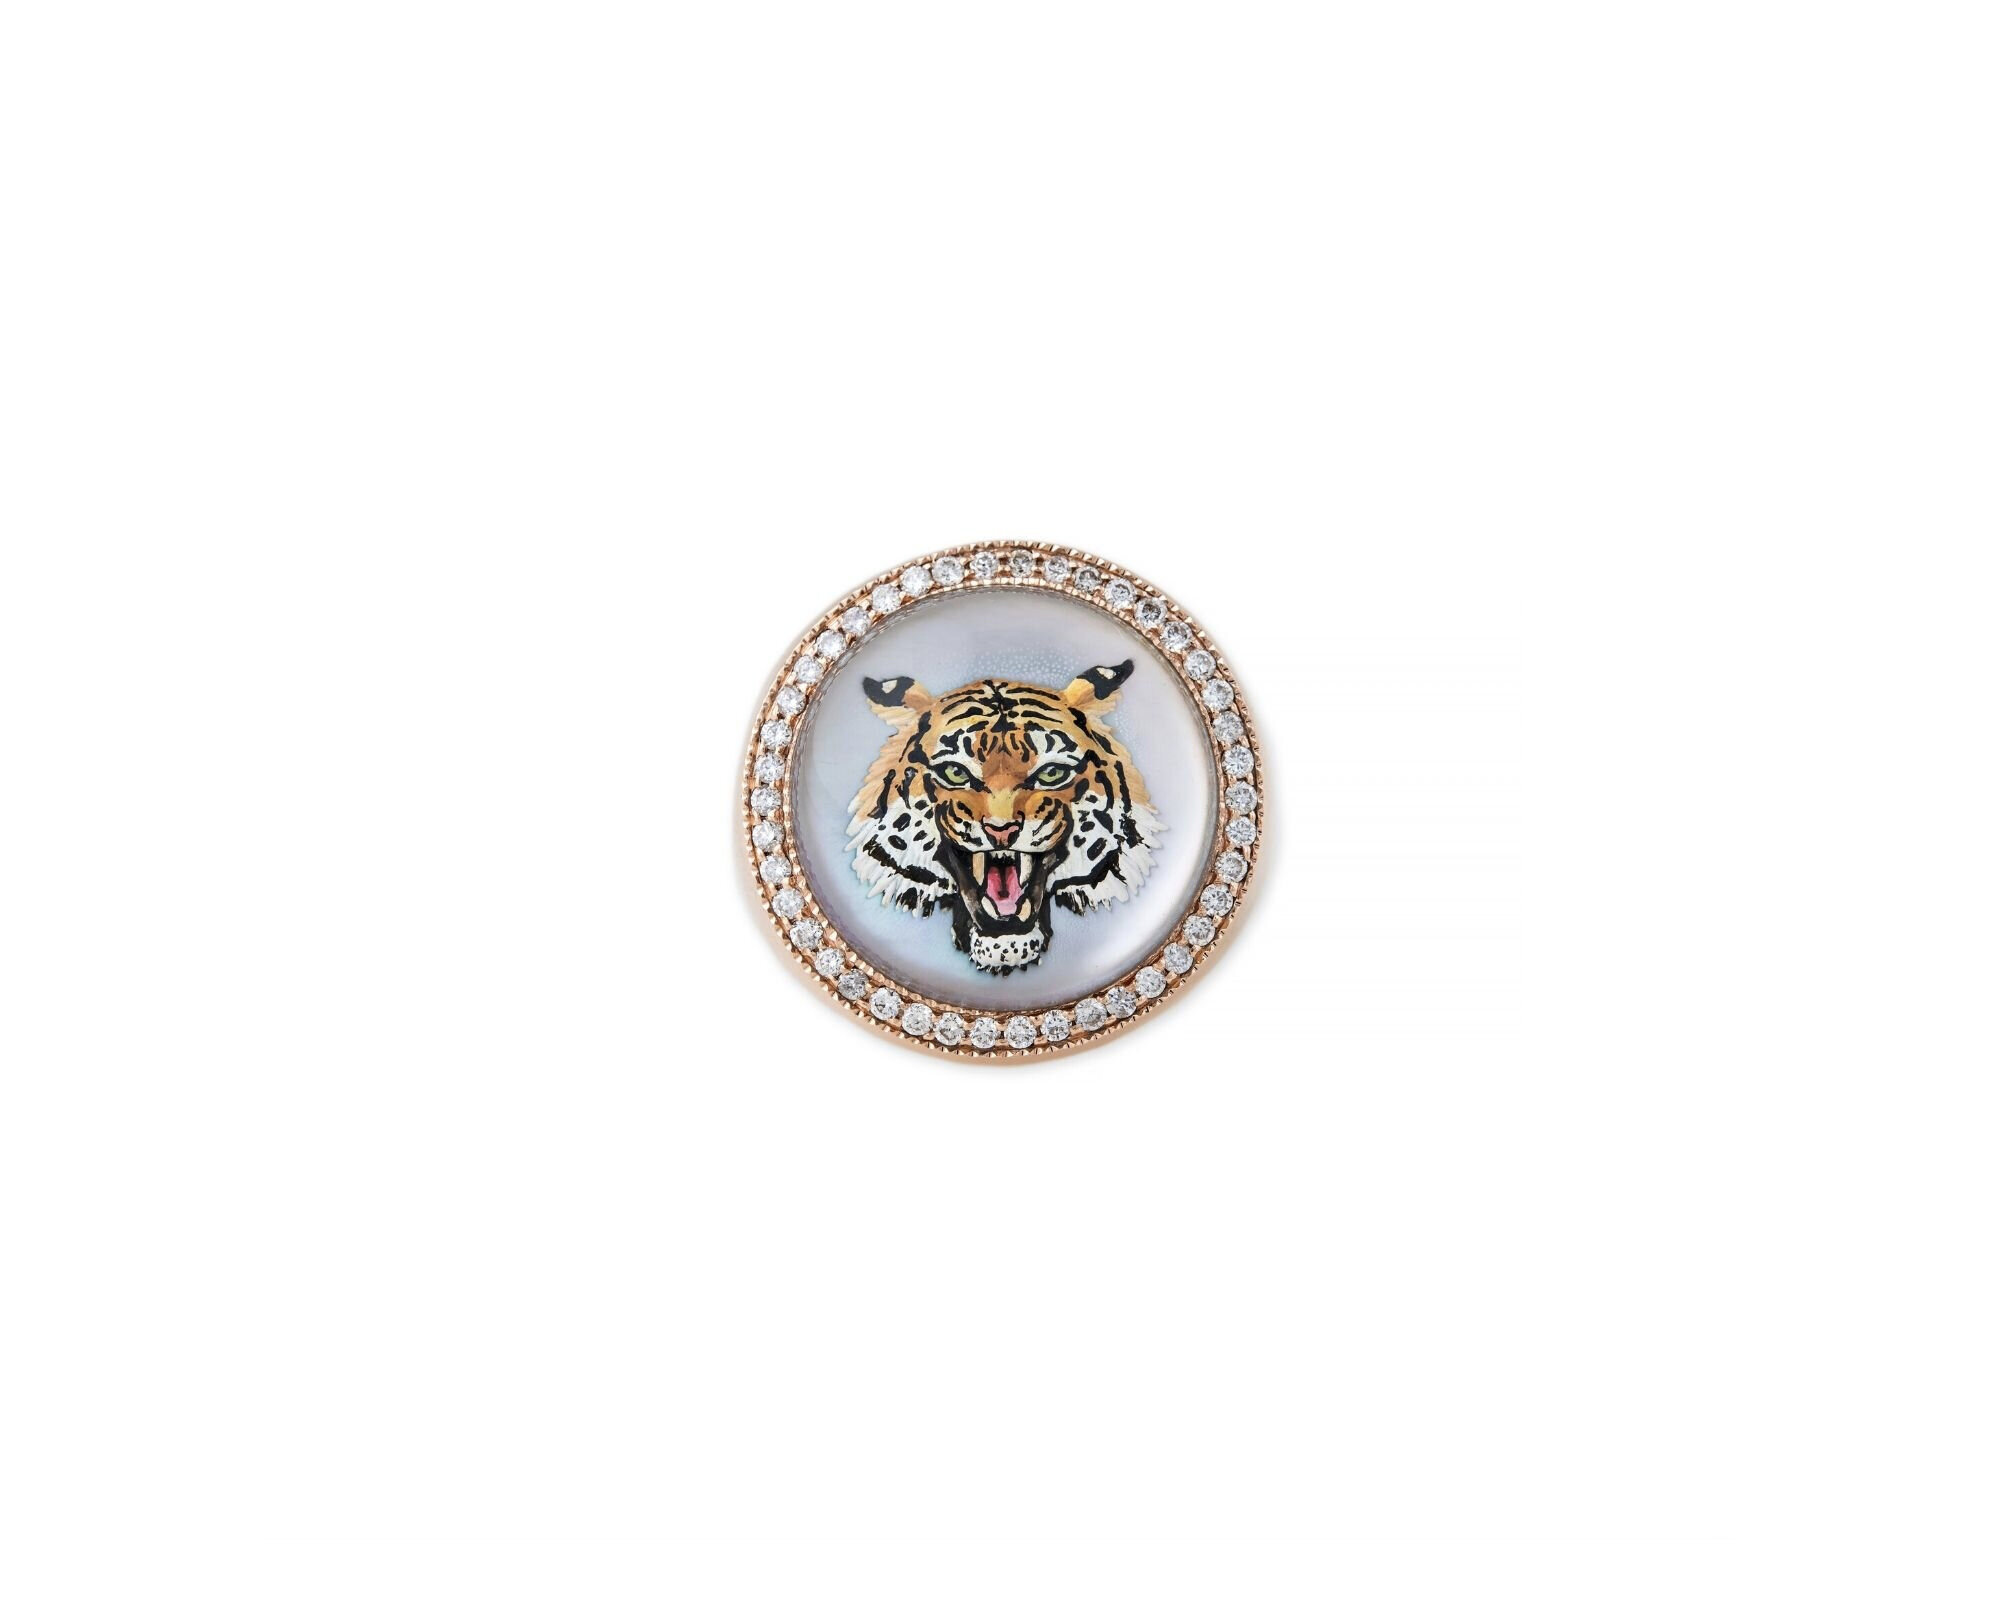 Jacquie Aiche- PAVE TIGER Signet RING ($3200) 